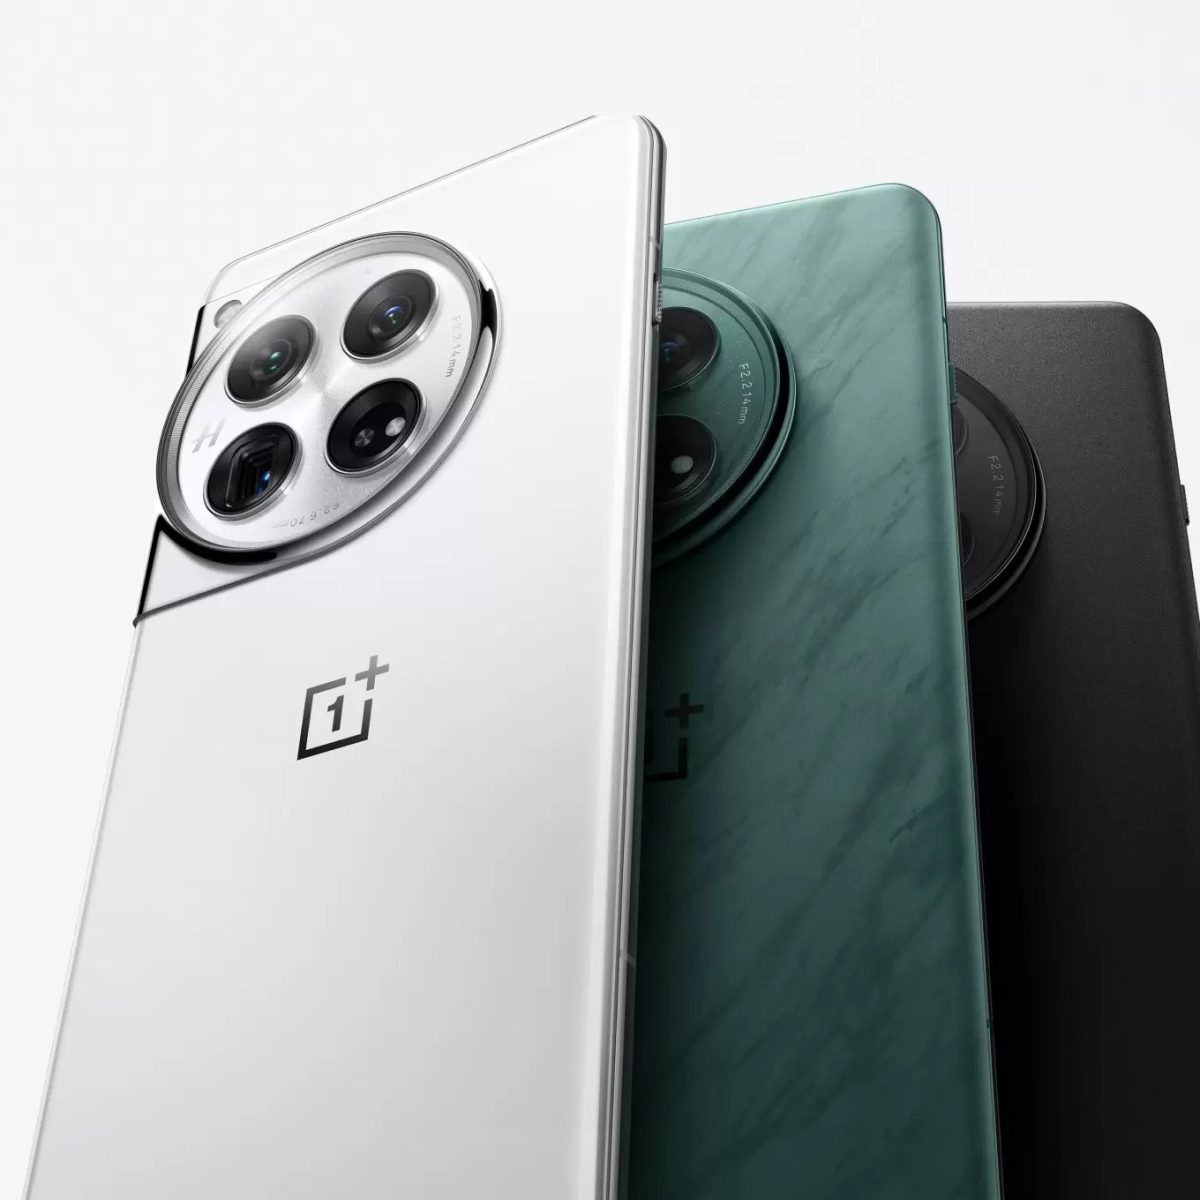 OnePlus 10 Pro is coming and here is all you can expect!